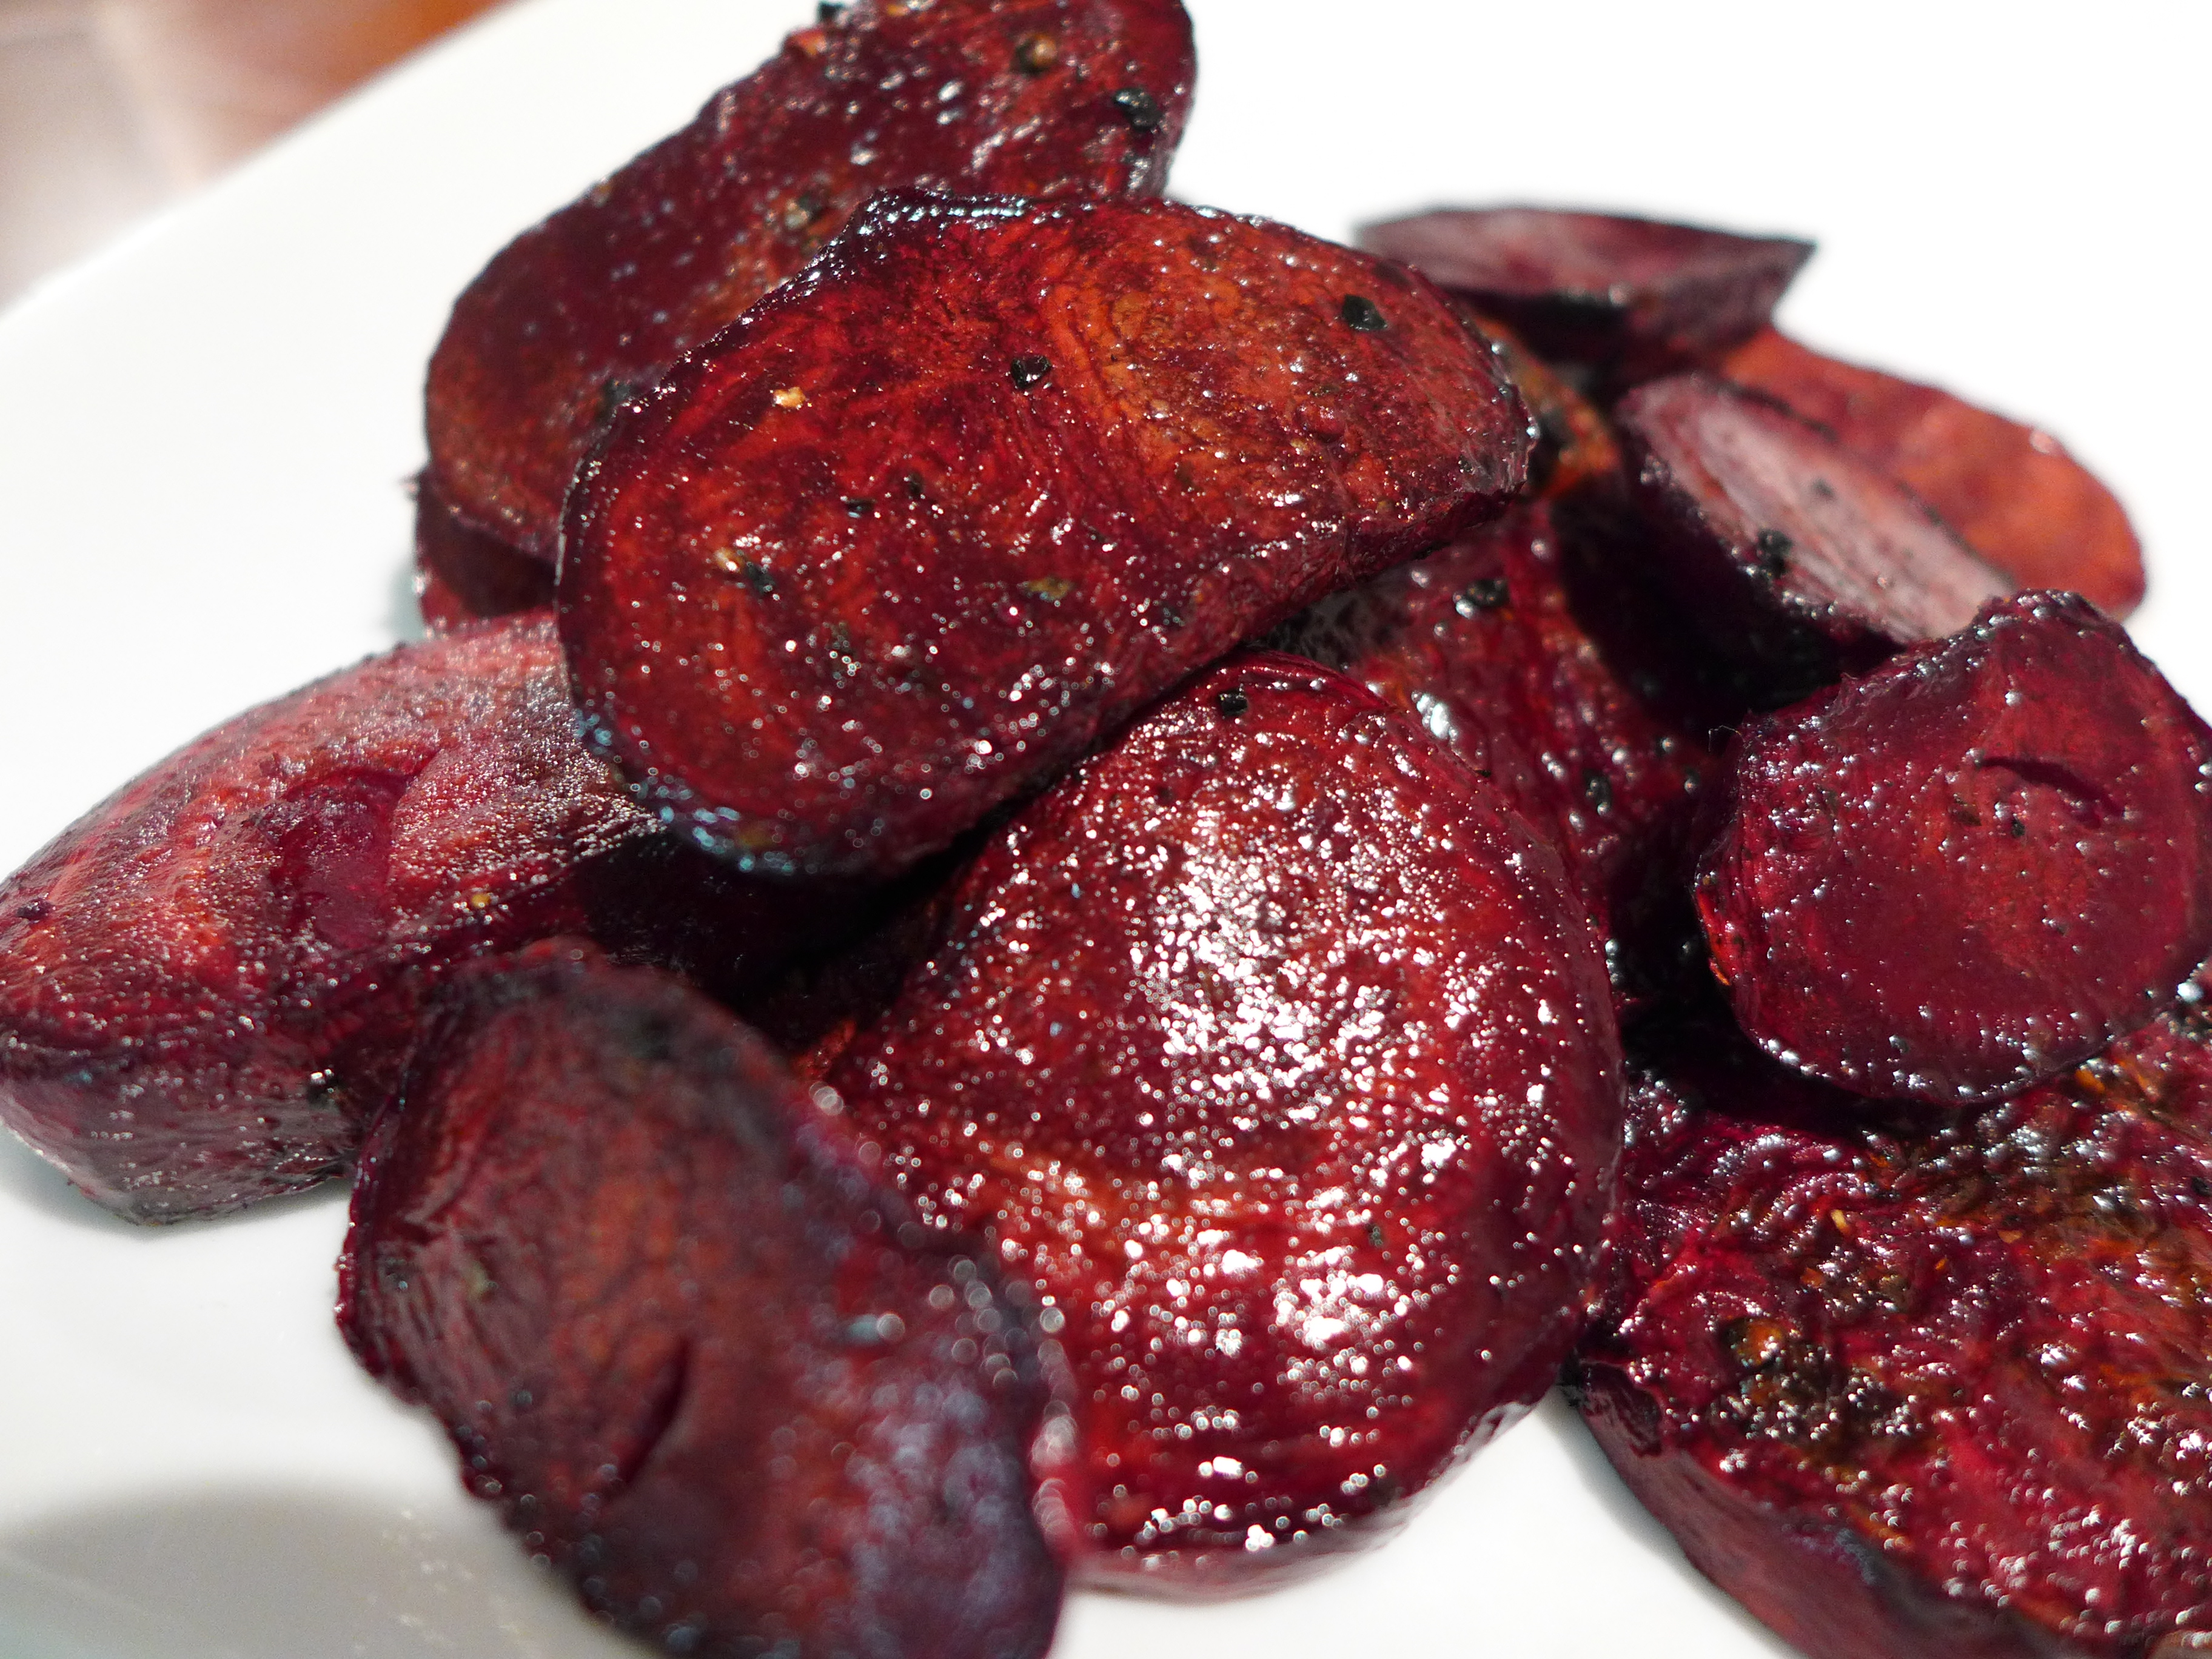 Dominate Your Walking Dead Viewing Party With Citrus Ginger Roasted Beets (Kitchen Overlord)